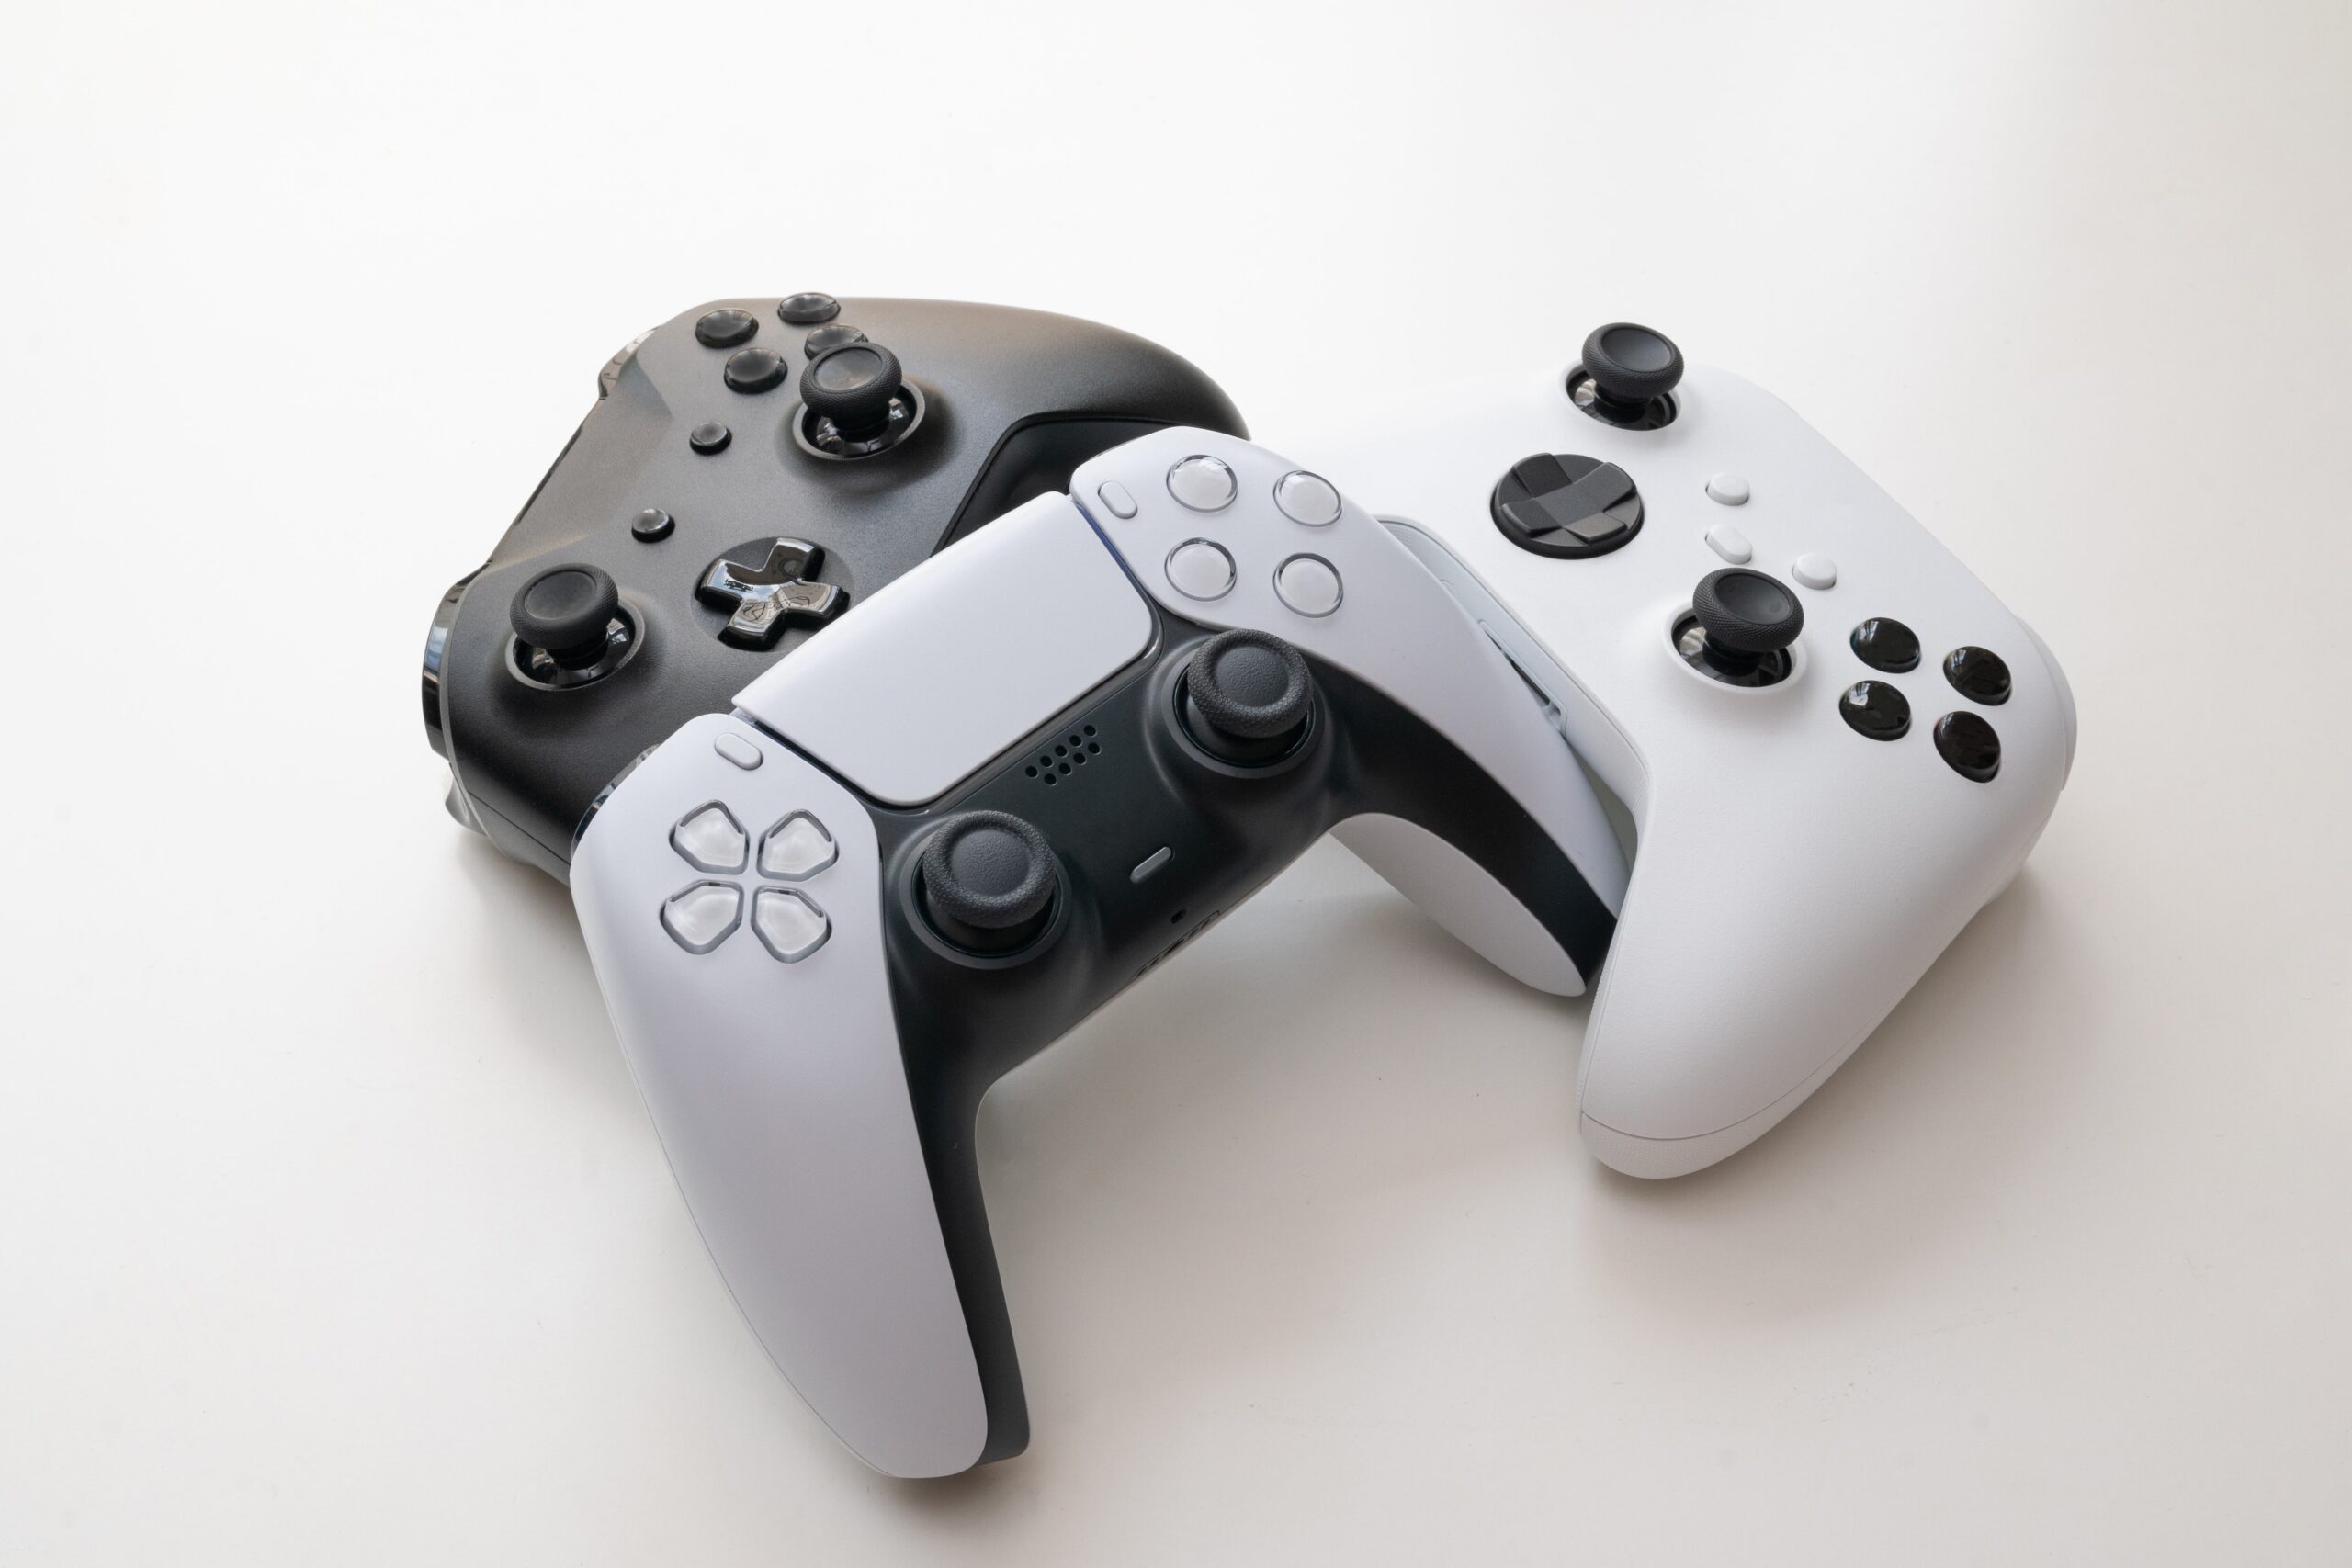 Can you use an Xbox Controller on a PS4 (Playstation) and vice versa?